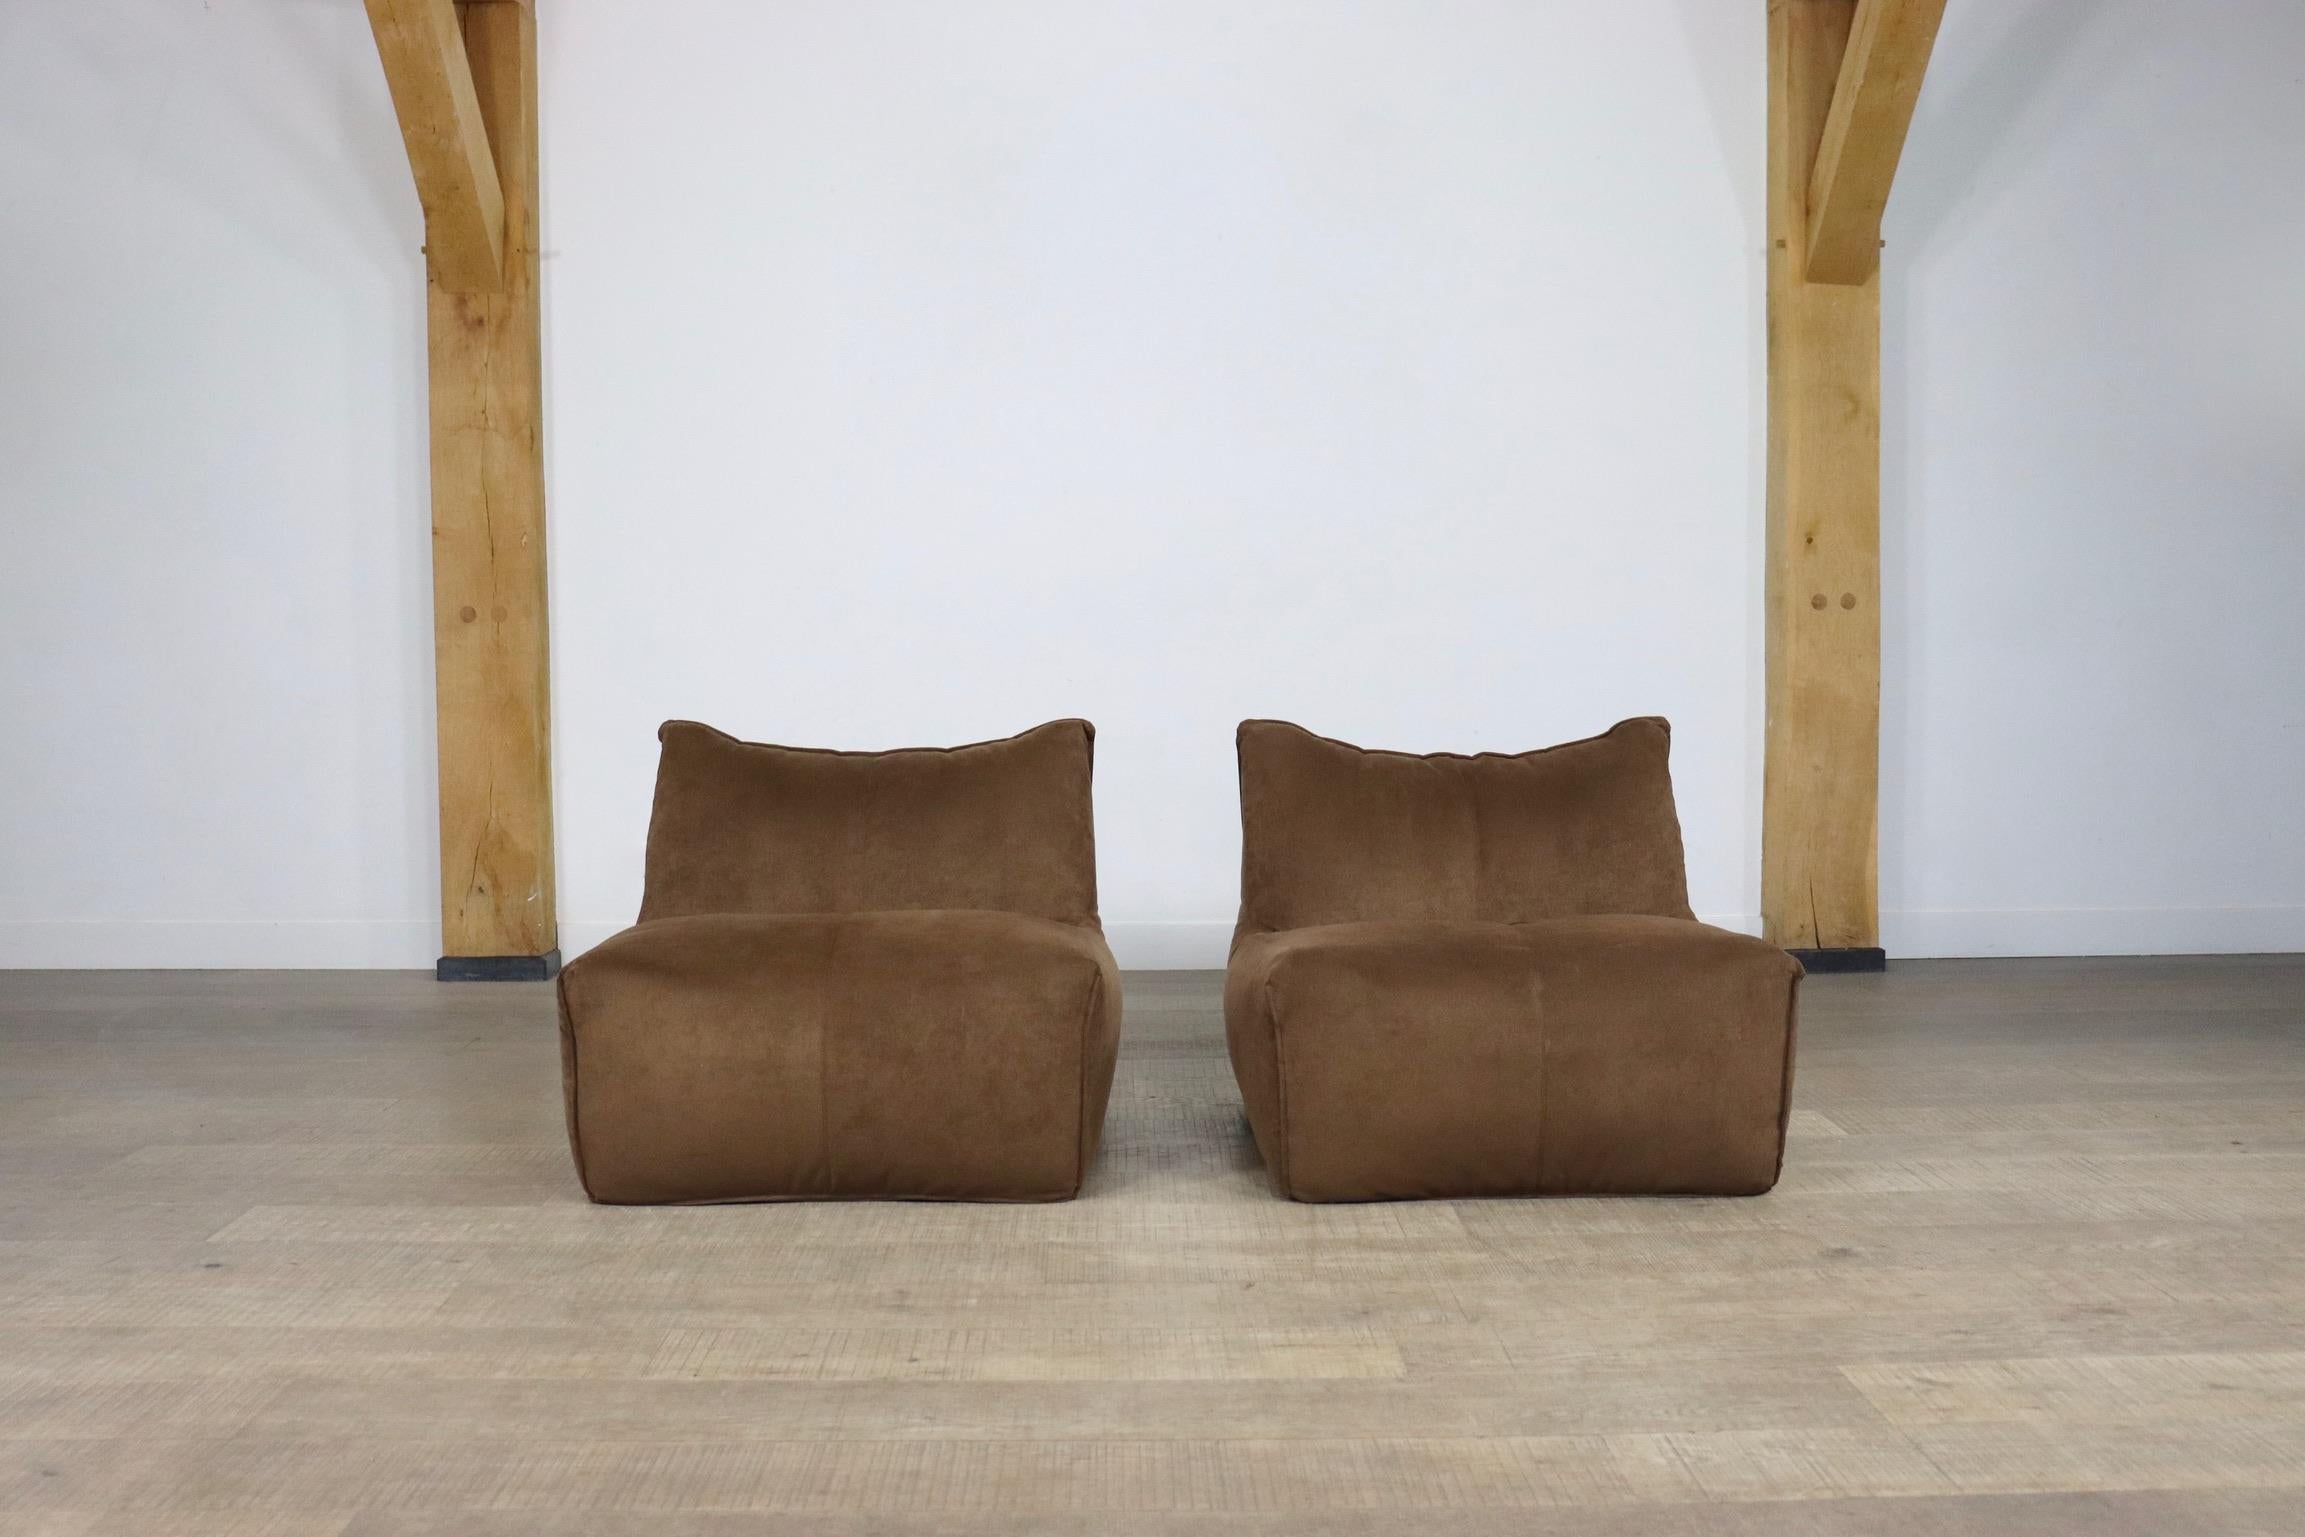 Stunning pair of “Le Bambole” armchairs designed by Mario Bellini for B & B Italia in the 1980s. The stunning original brown suede upholstery is Besides the outstanding comfort these armchairs are famous for its iconic looks. 

Mario Bellini